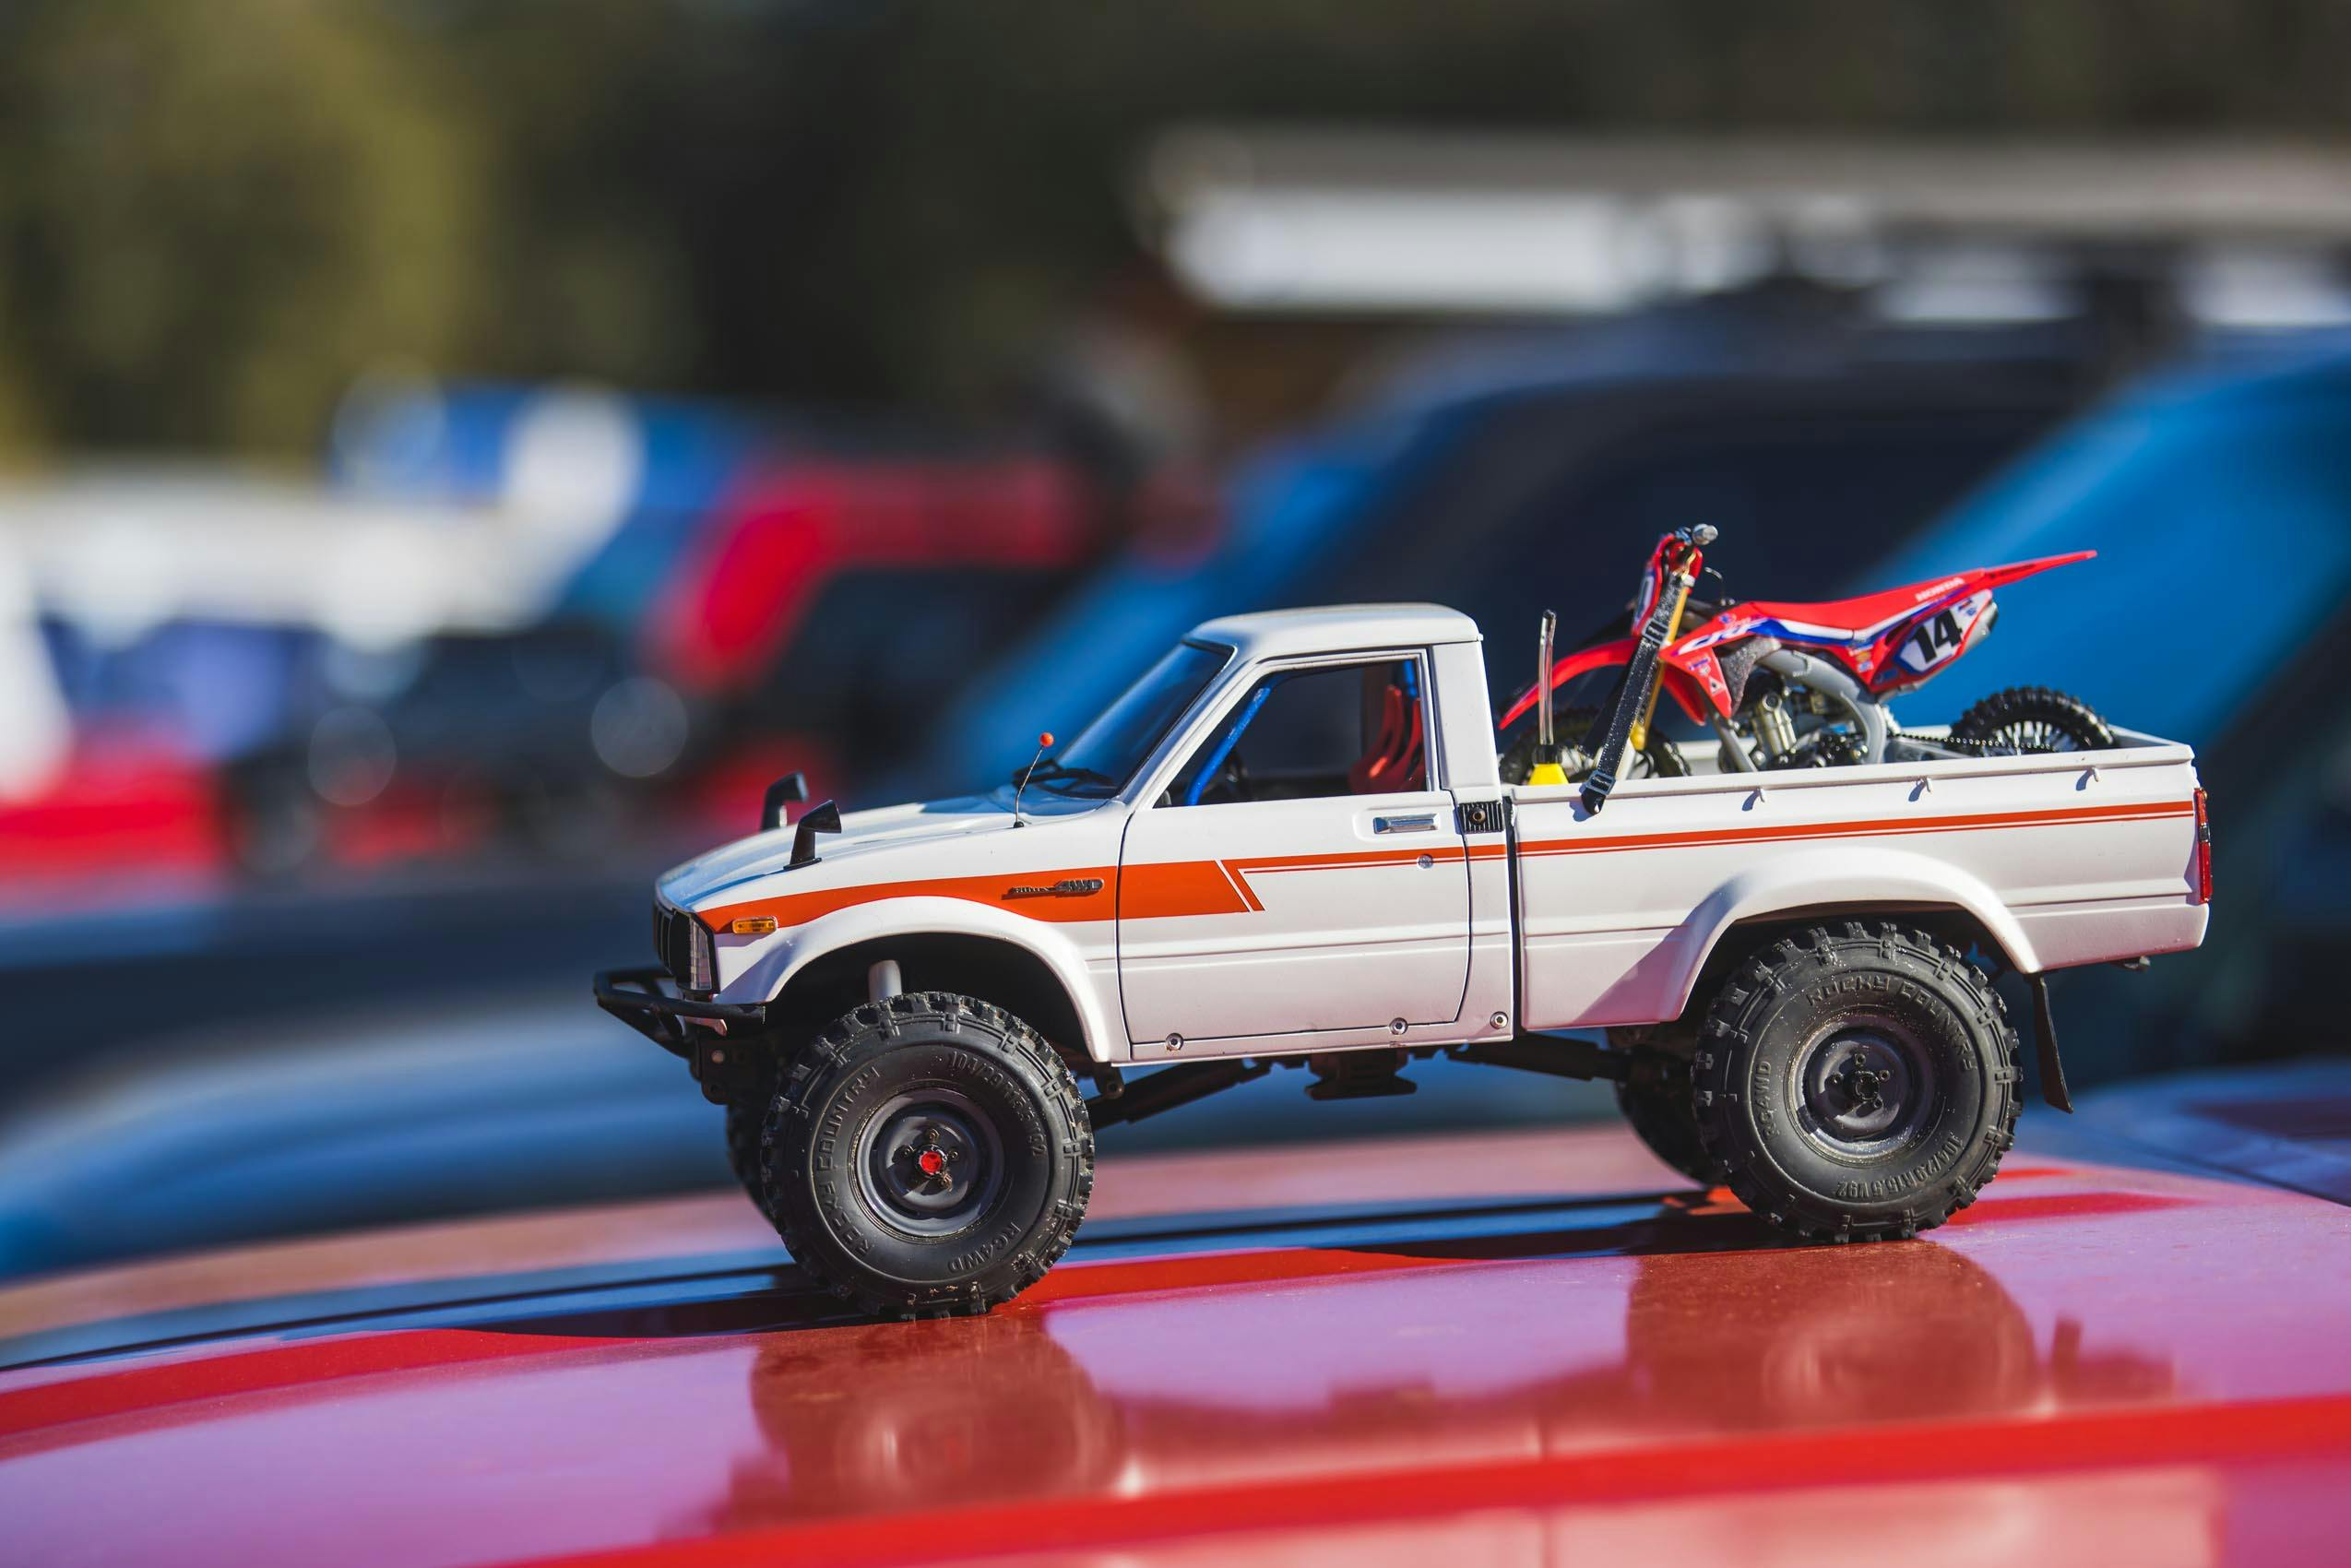 Scale RC Crawlers Brett Levan Toyota Pickup with dirt bike in bed